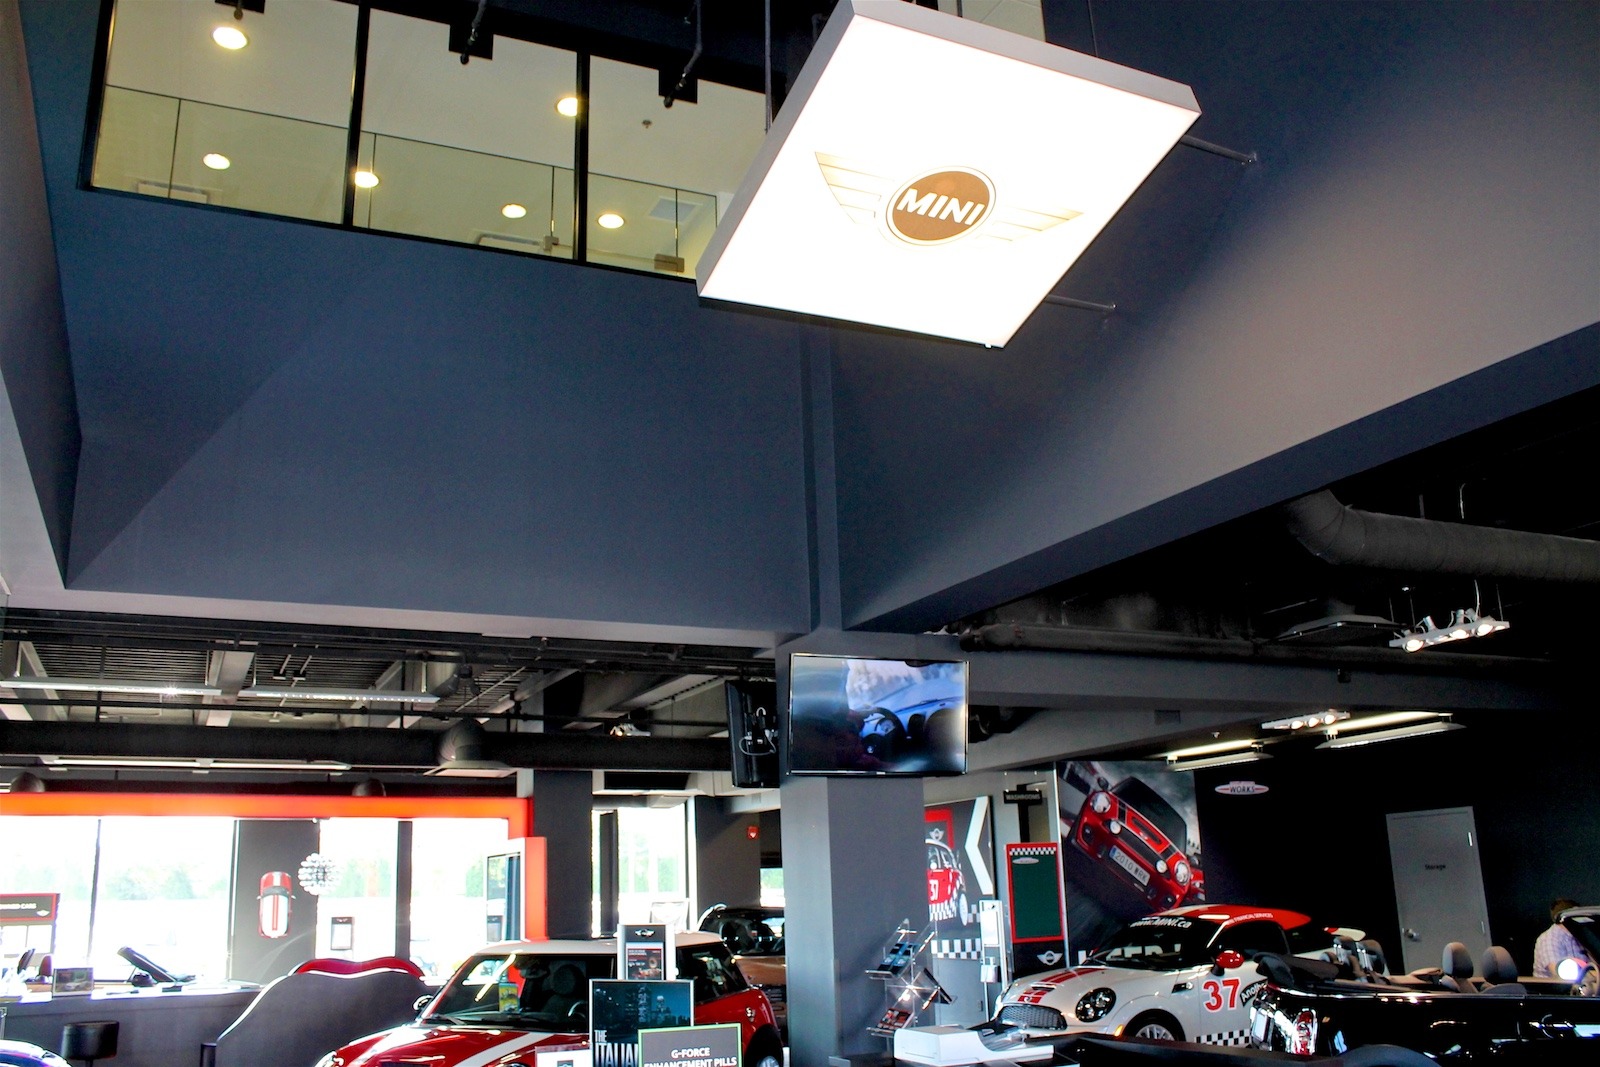 Robertson-Walls-Ceilings-Completed-Projects-Luxury-Car-Dealerships-Mini-Richmond-3 MINI RICHMOND